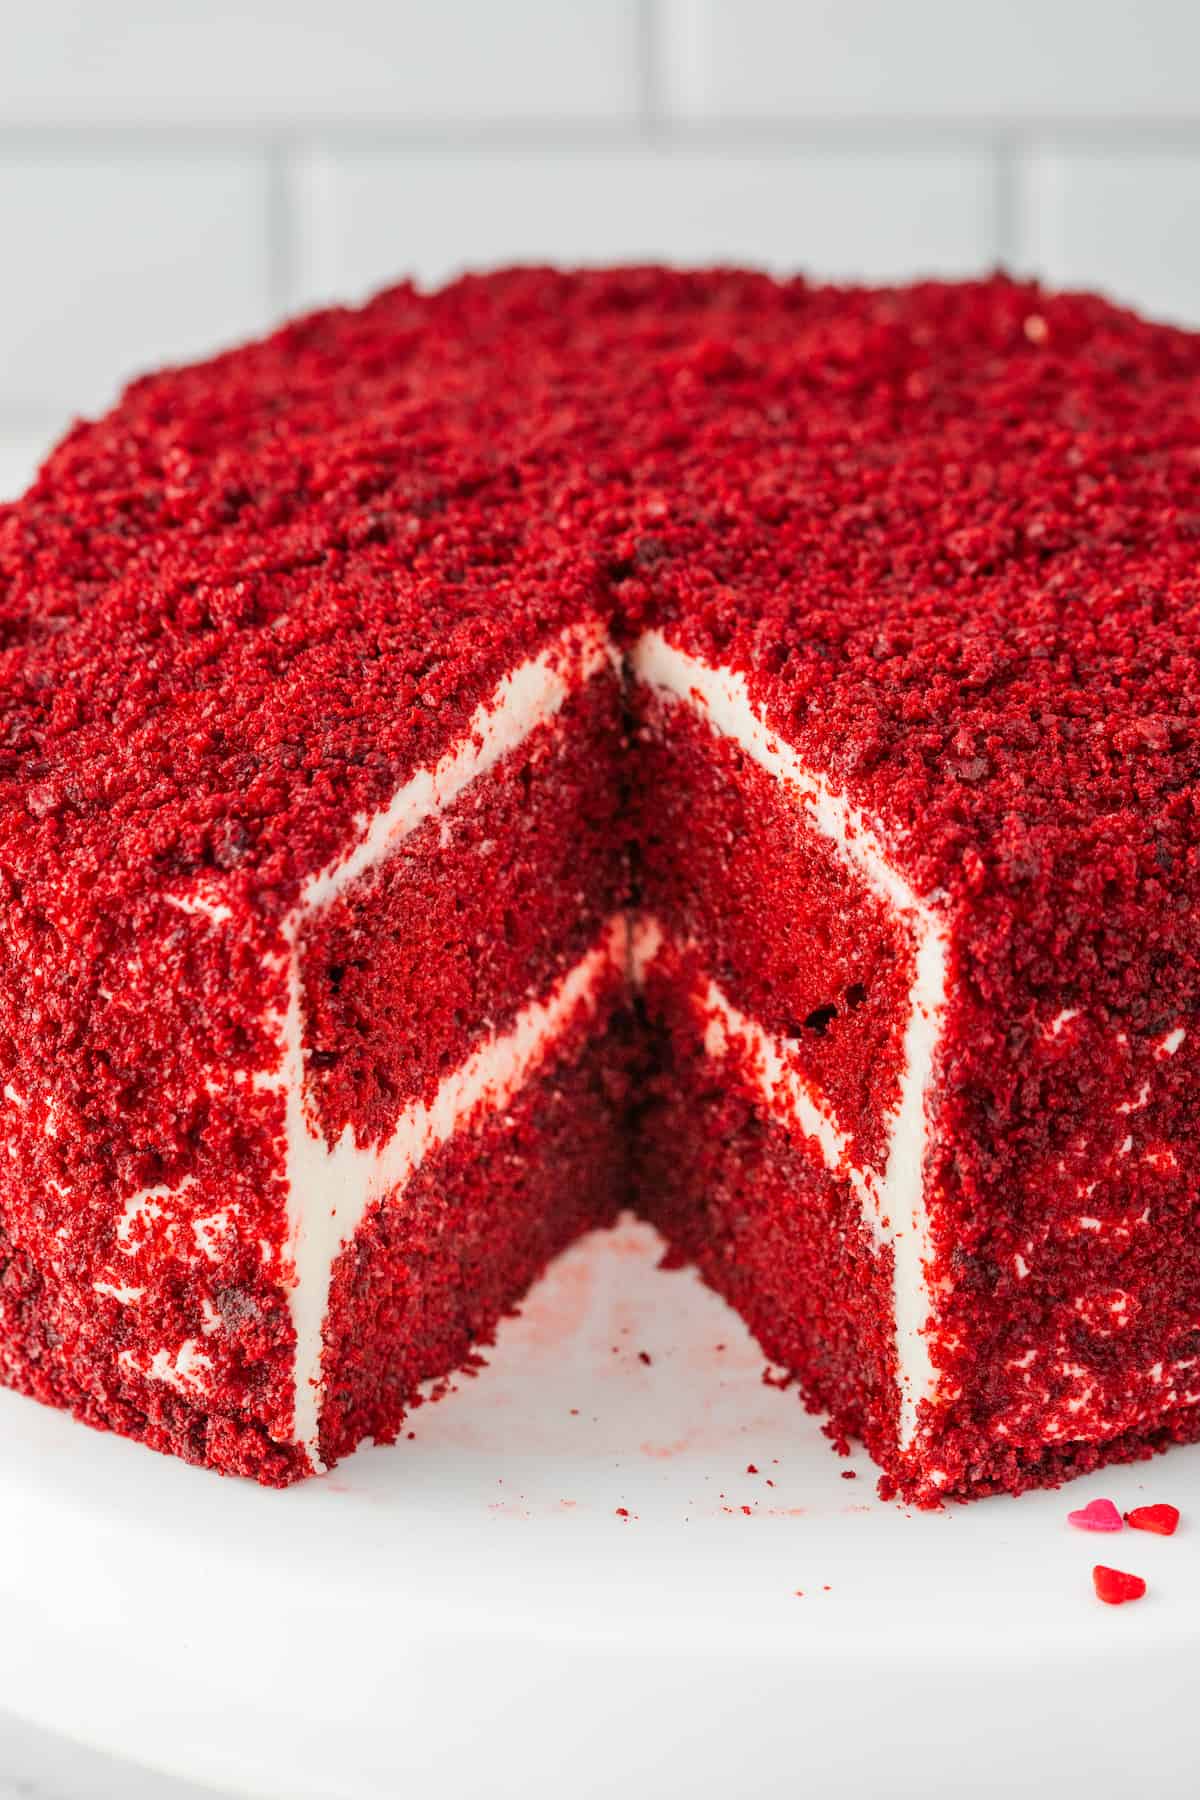 A red velvet cake, perfectly baked with a delightful slice taken out.